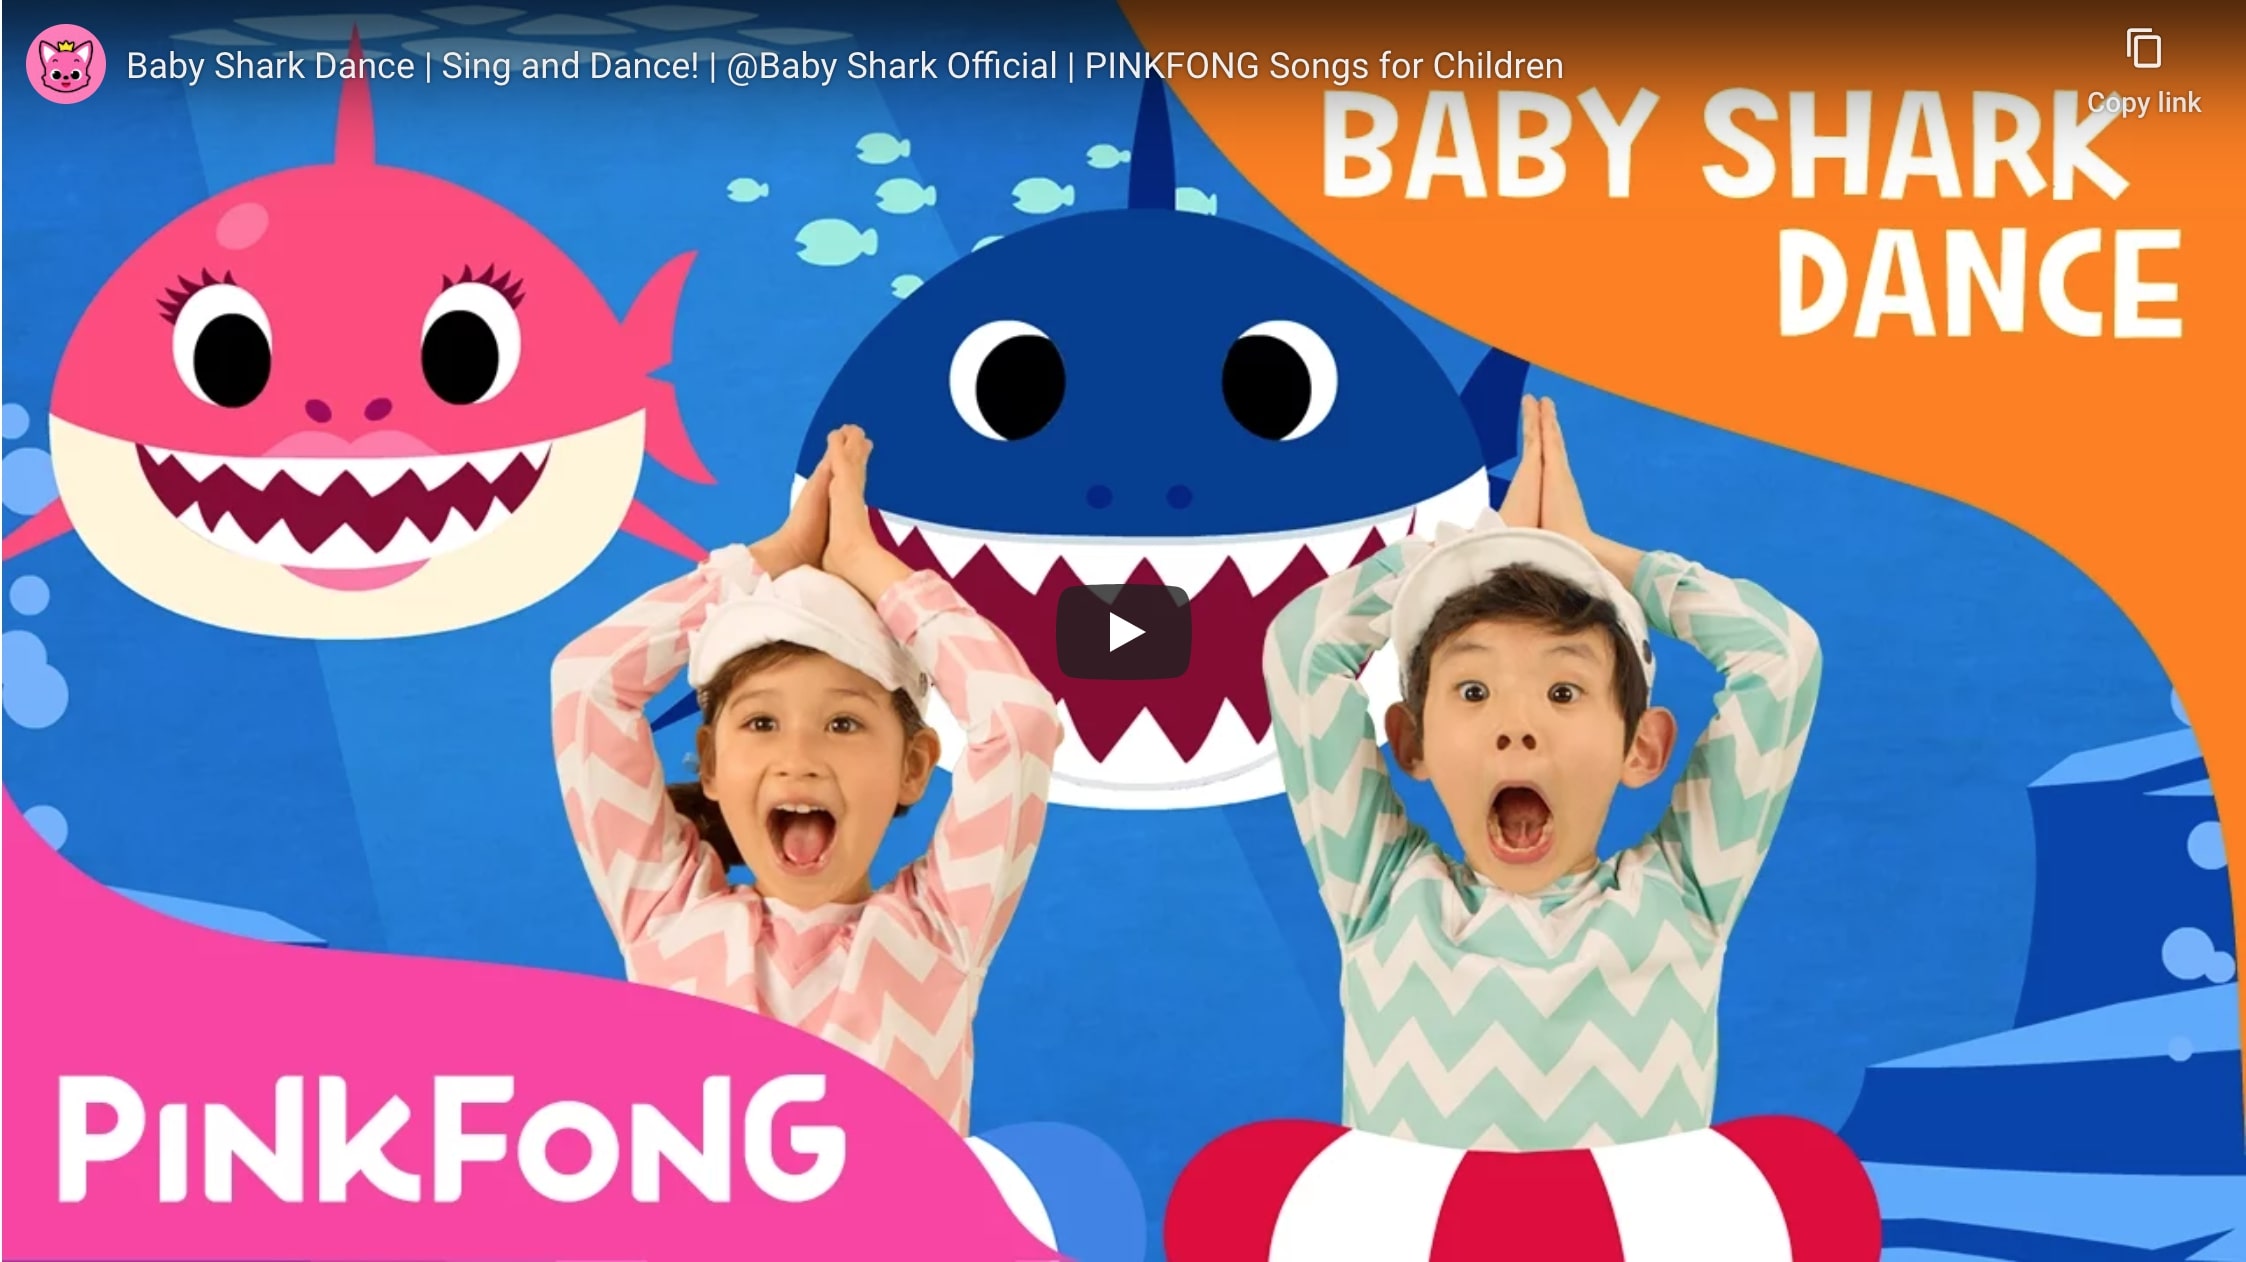 baby shark official youtube video